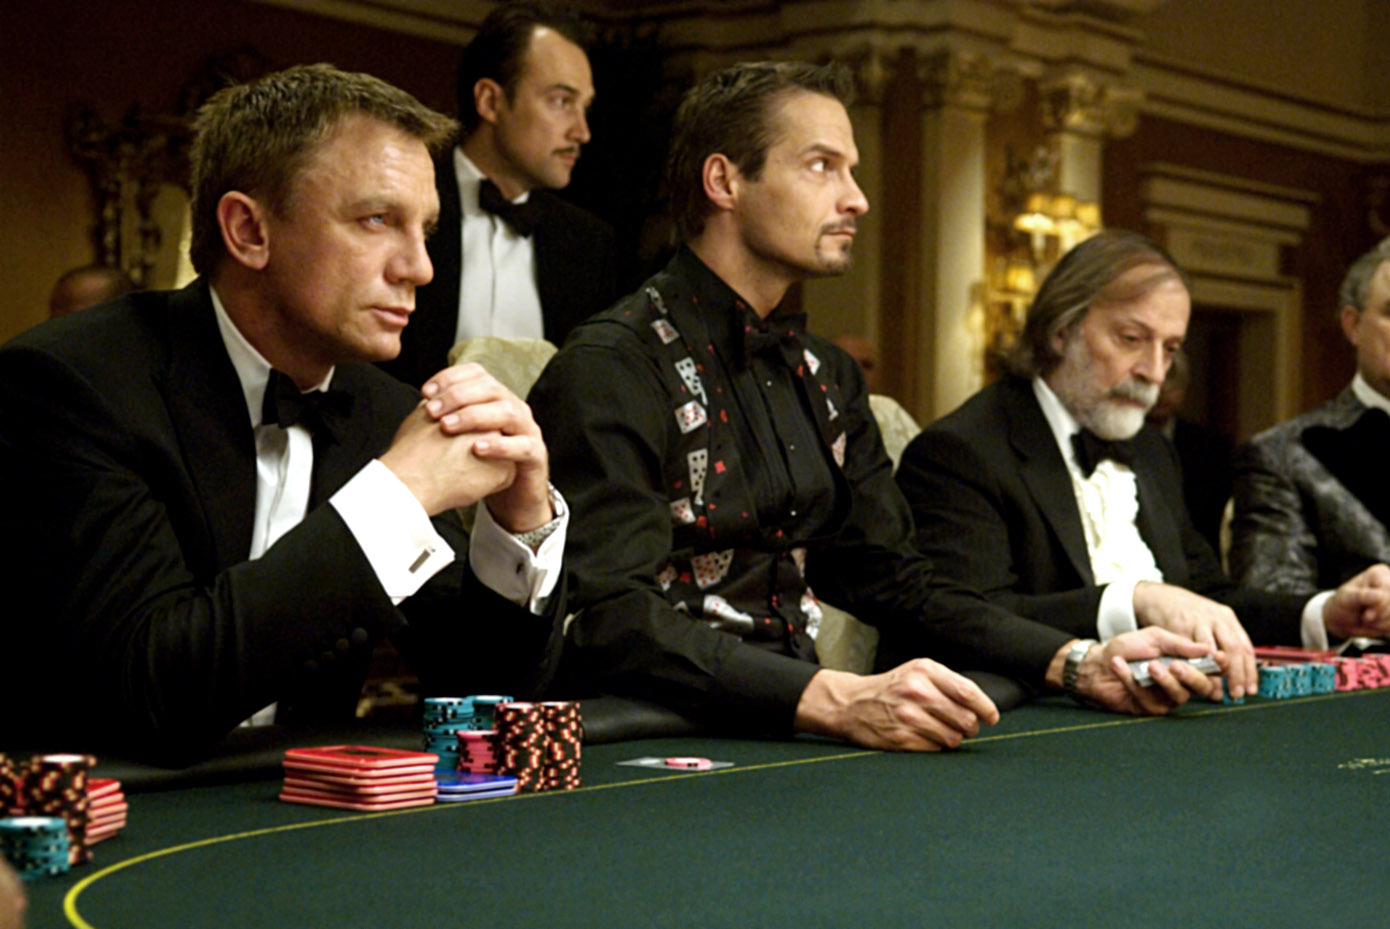 Daniel Craig sits and watches as other players look on.